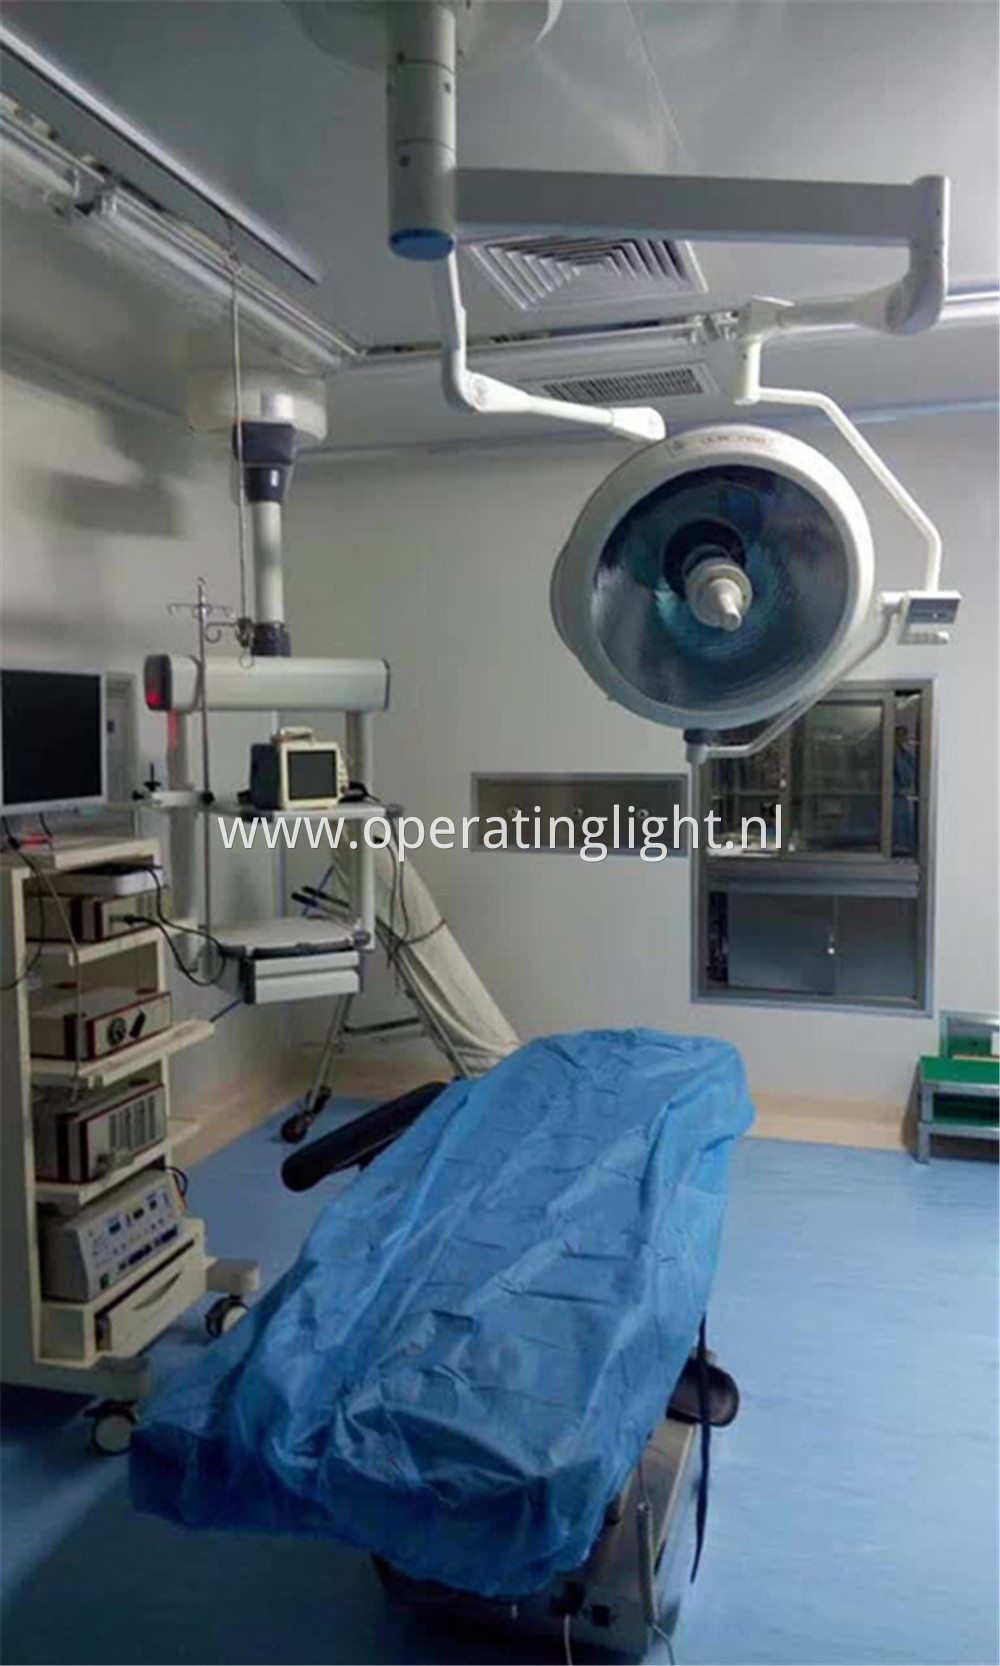 Therapy dental operating light